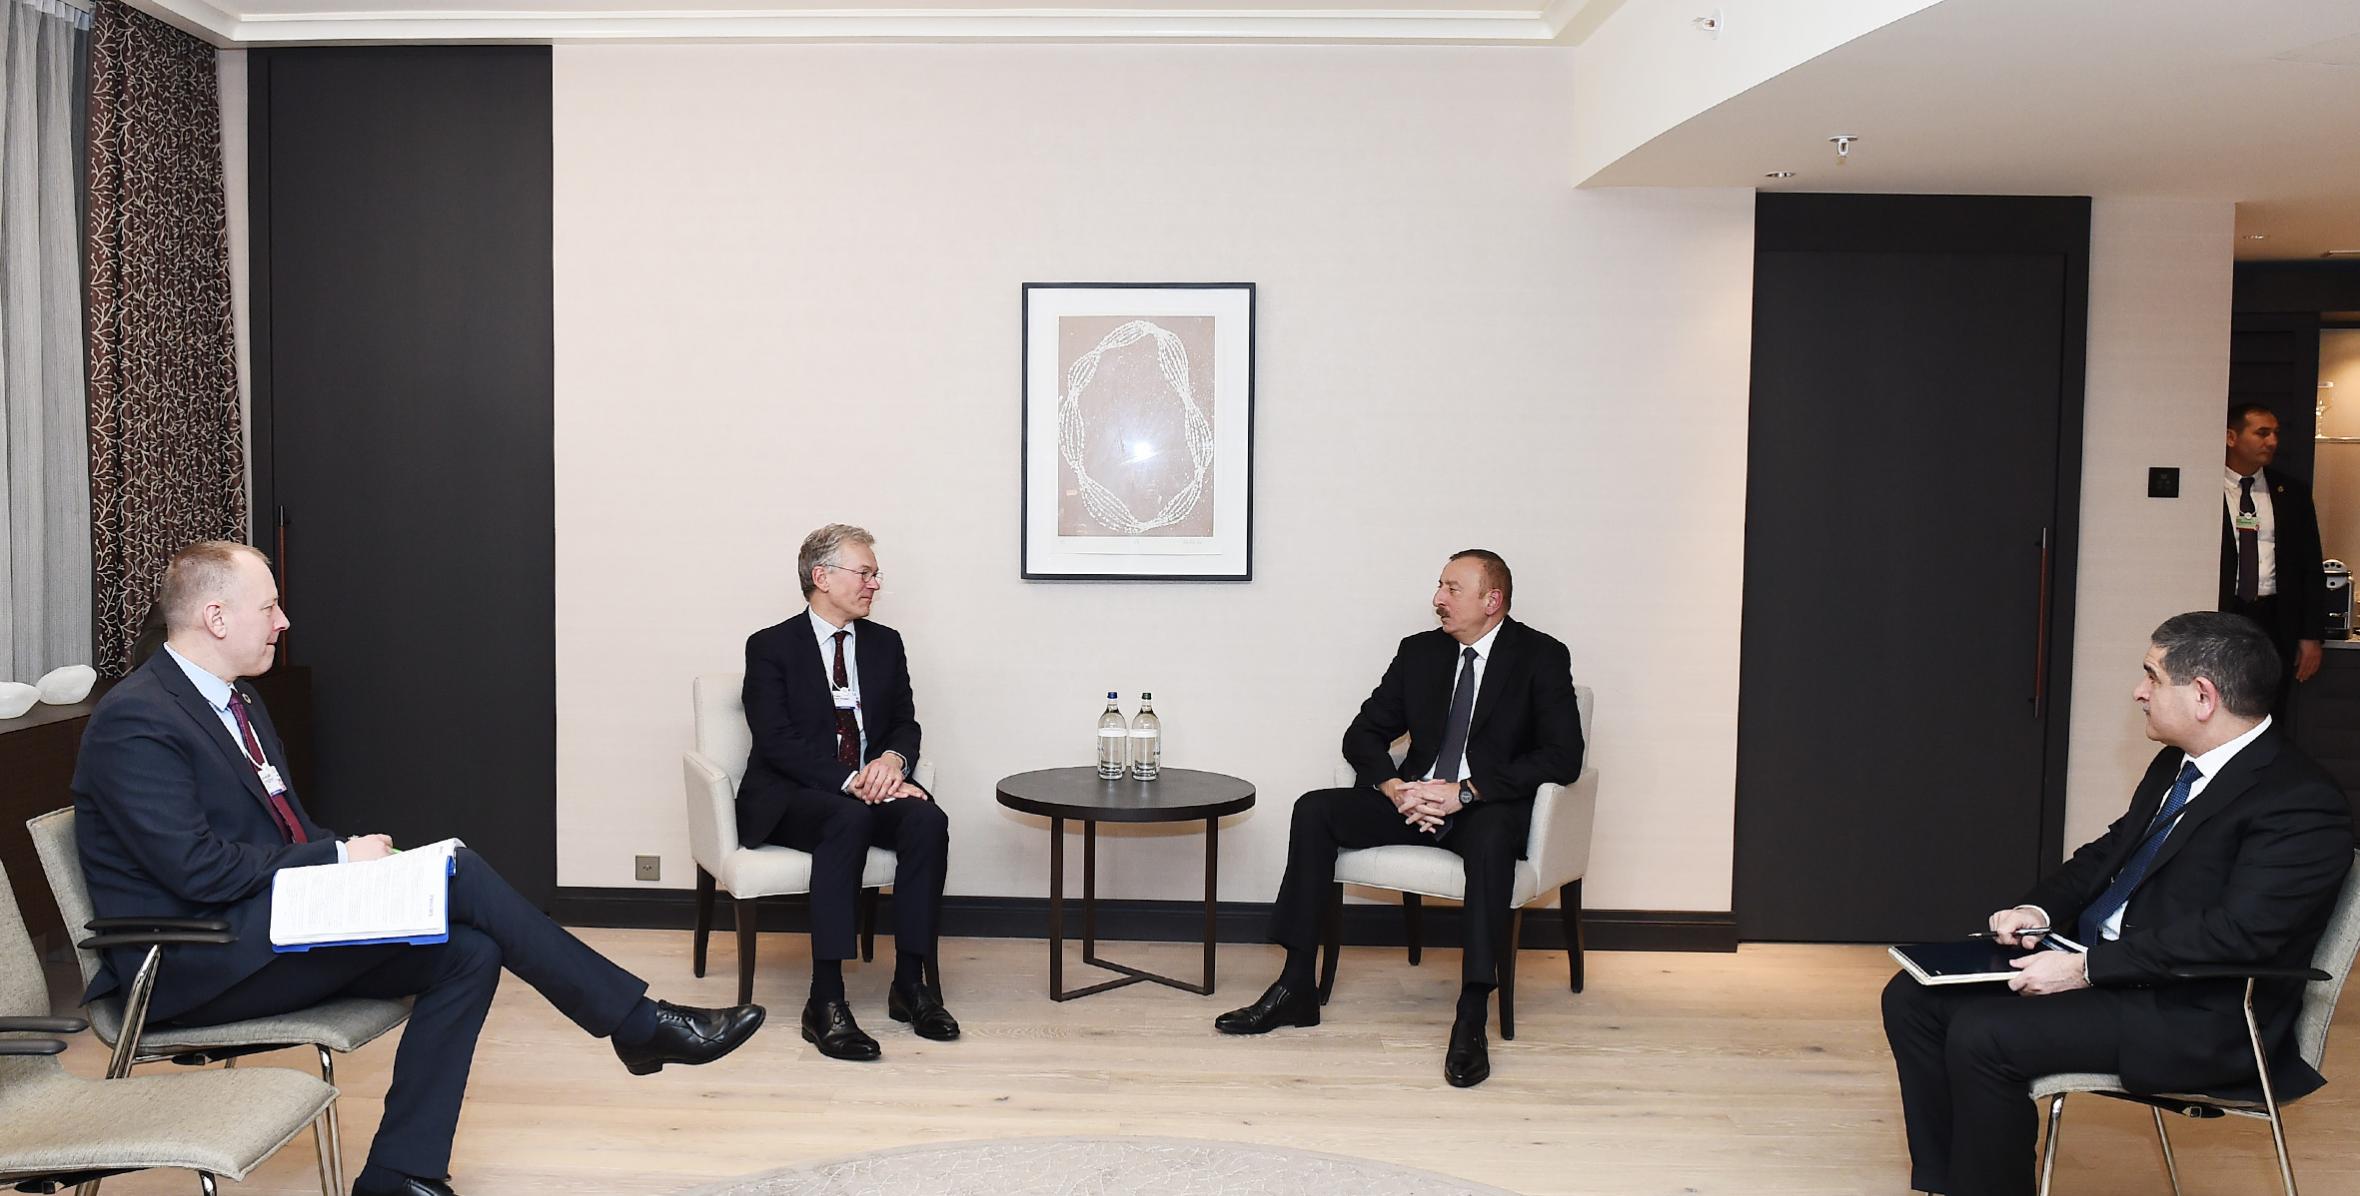 Ilham Aliyev met with Royal Philips CEO